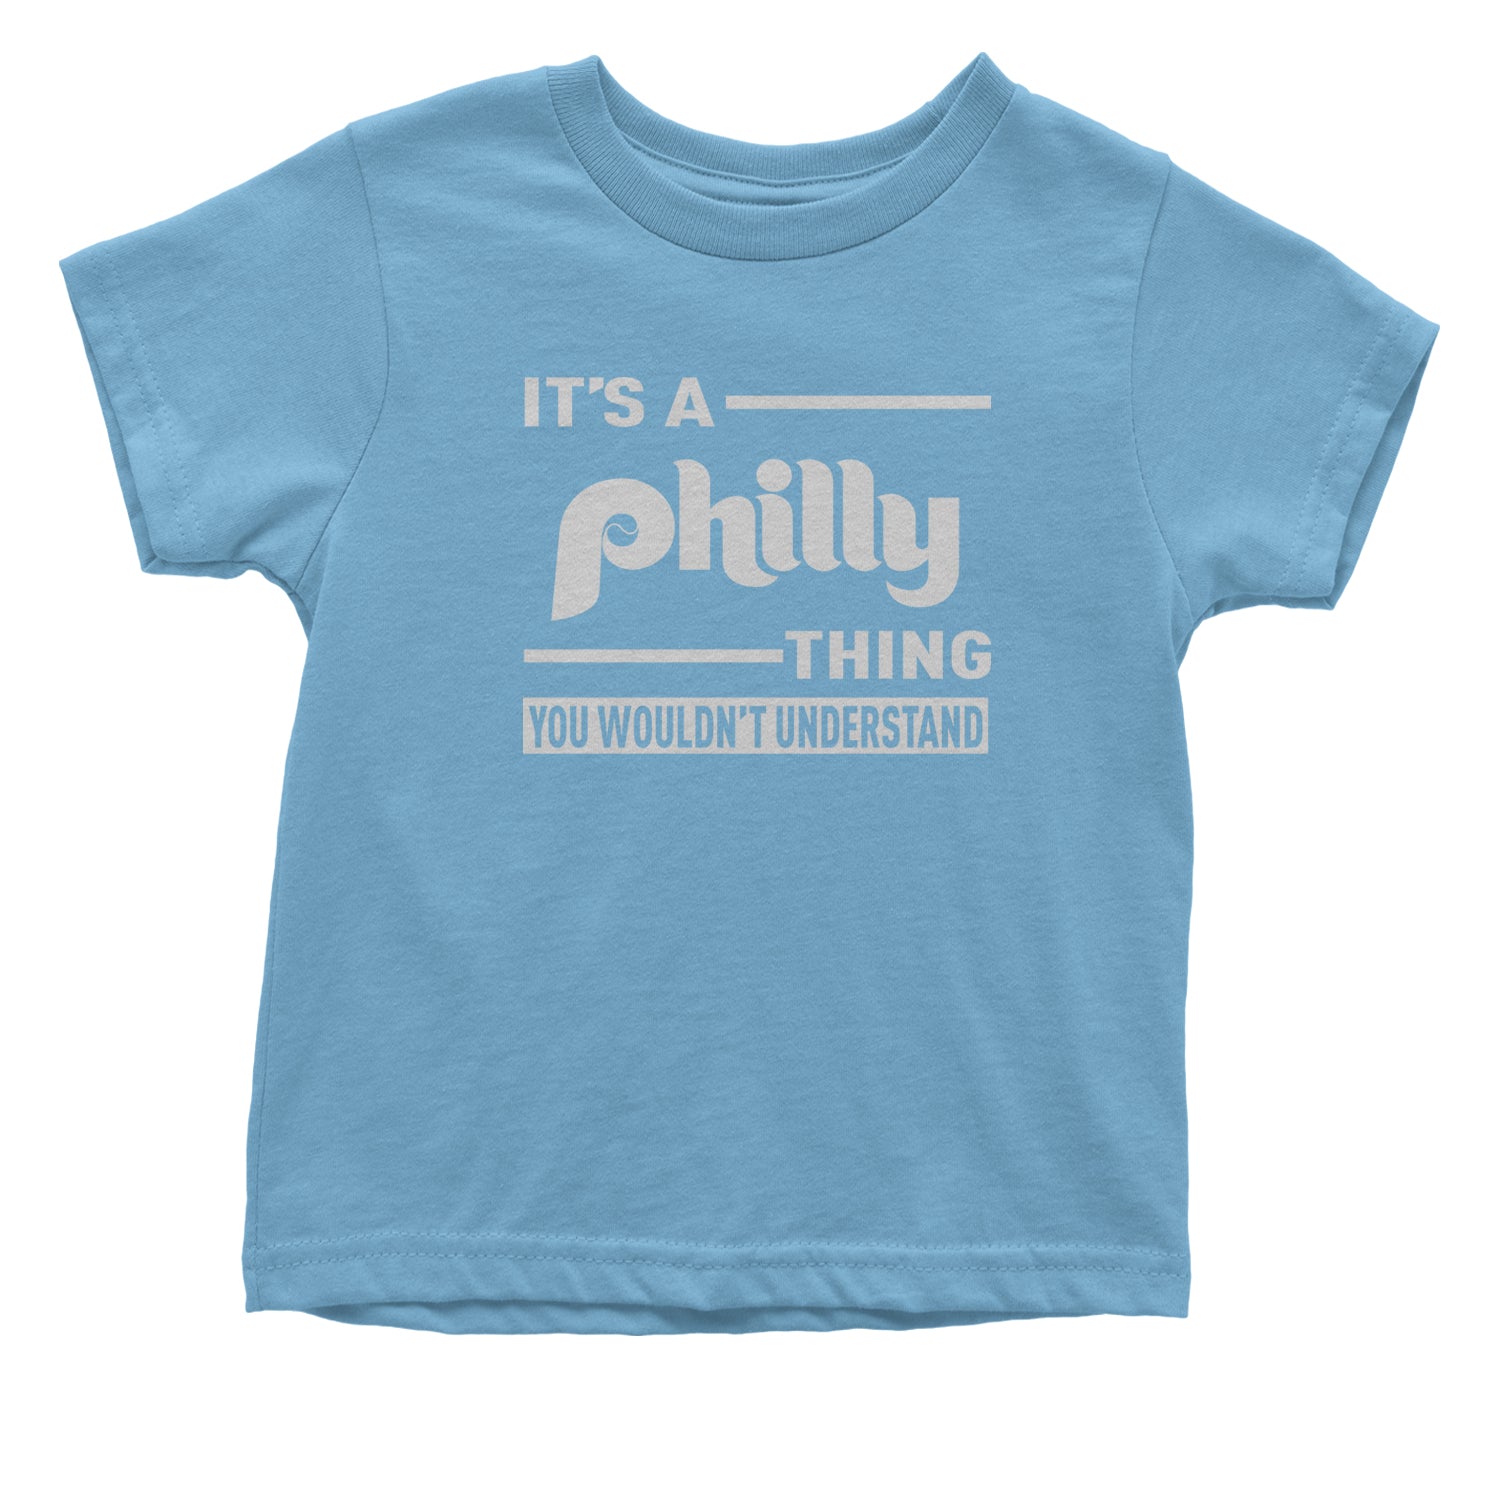 It's A Philly Thing, You Wouldn't Understand Infant One-Piece Romper Bodysuit and Toddler T-shirt baseball, filly, football, jawn, morgan, Philadelphia, philli by Expression Tees